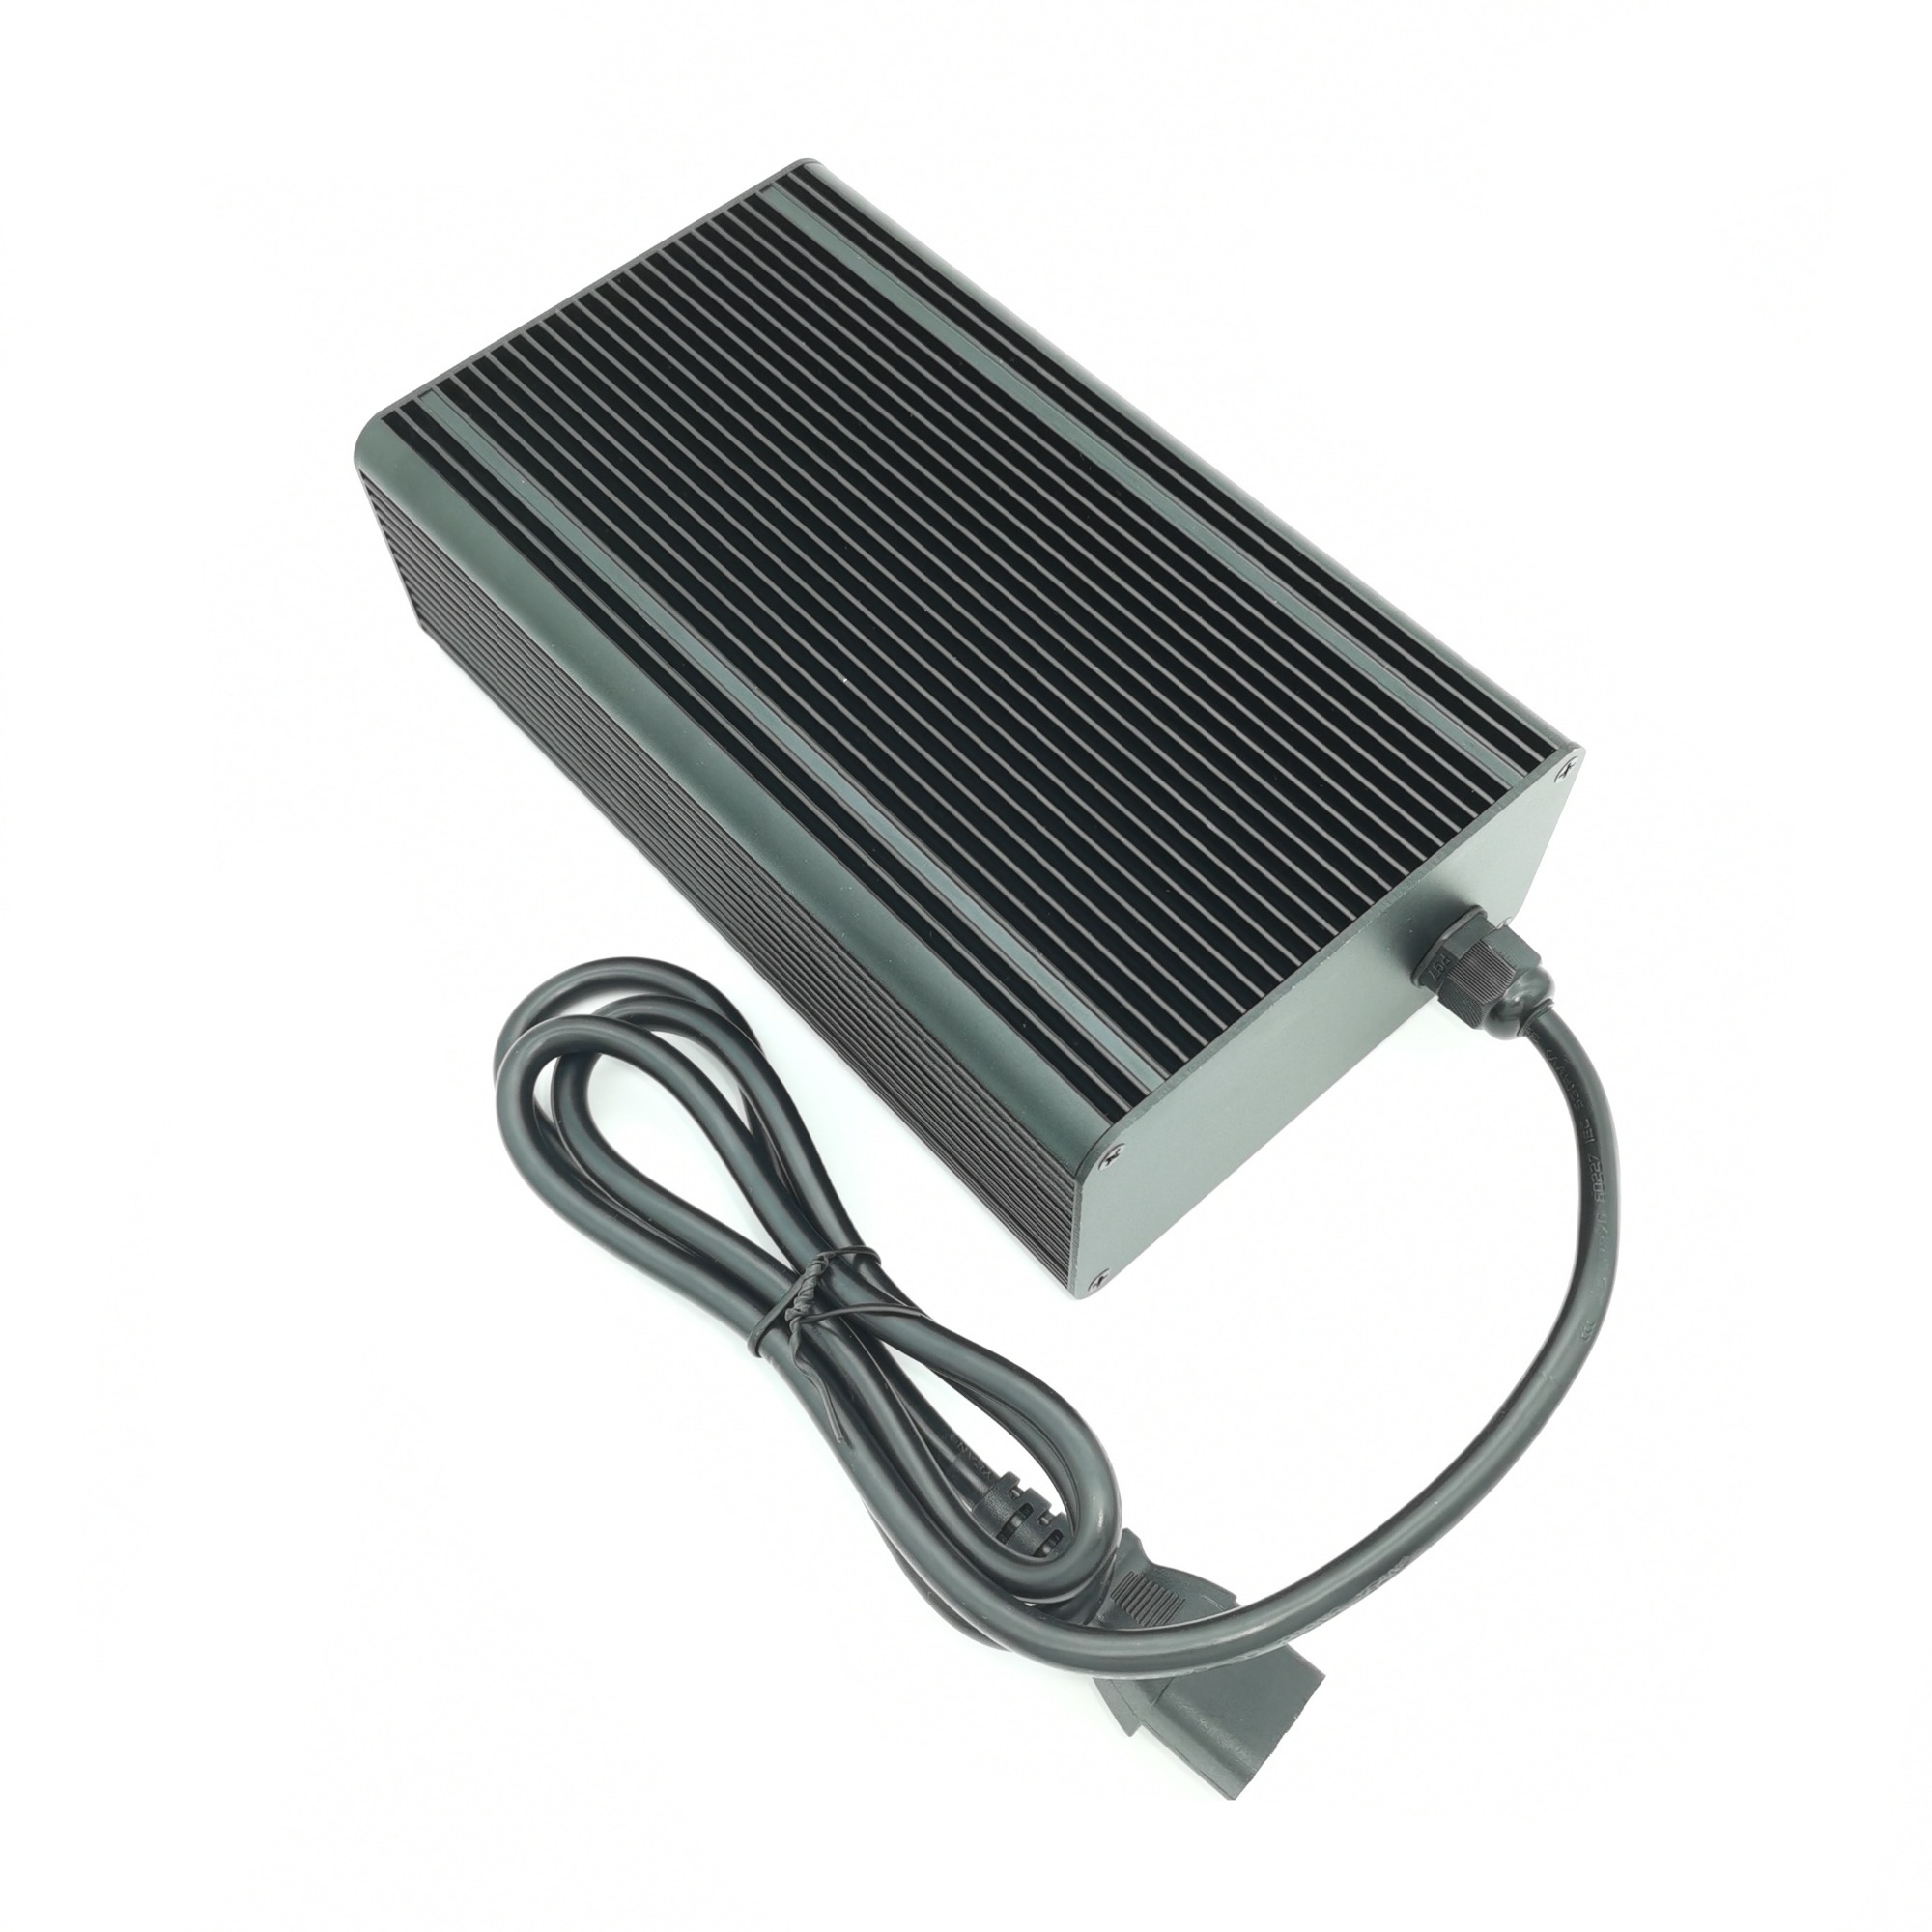 Smart Dustproof design 75.6V 4A Lithium battery charger For 60V 18S Li-ion Battery charger Electric Scooter E-bike motorcycle